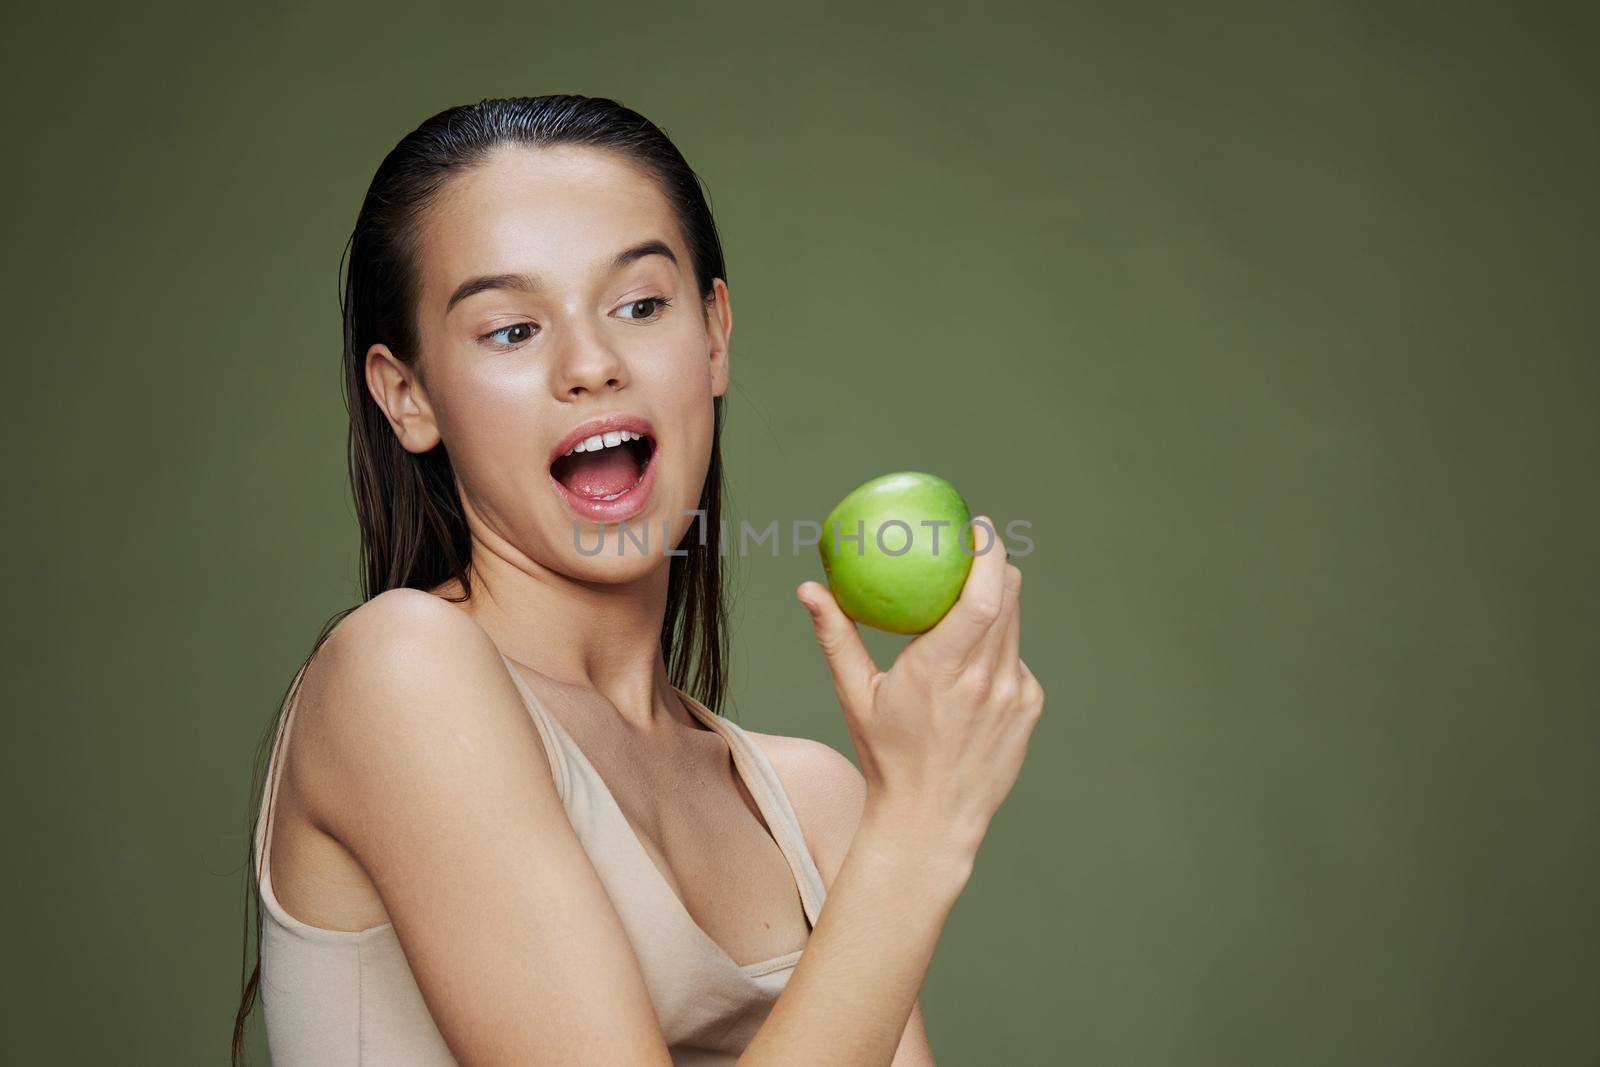 young woman with a green apple smile close-up Lifestyle by SHOTPRIME